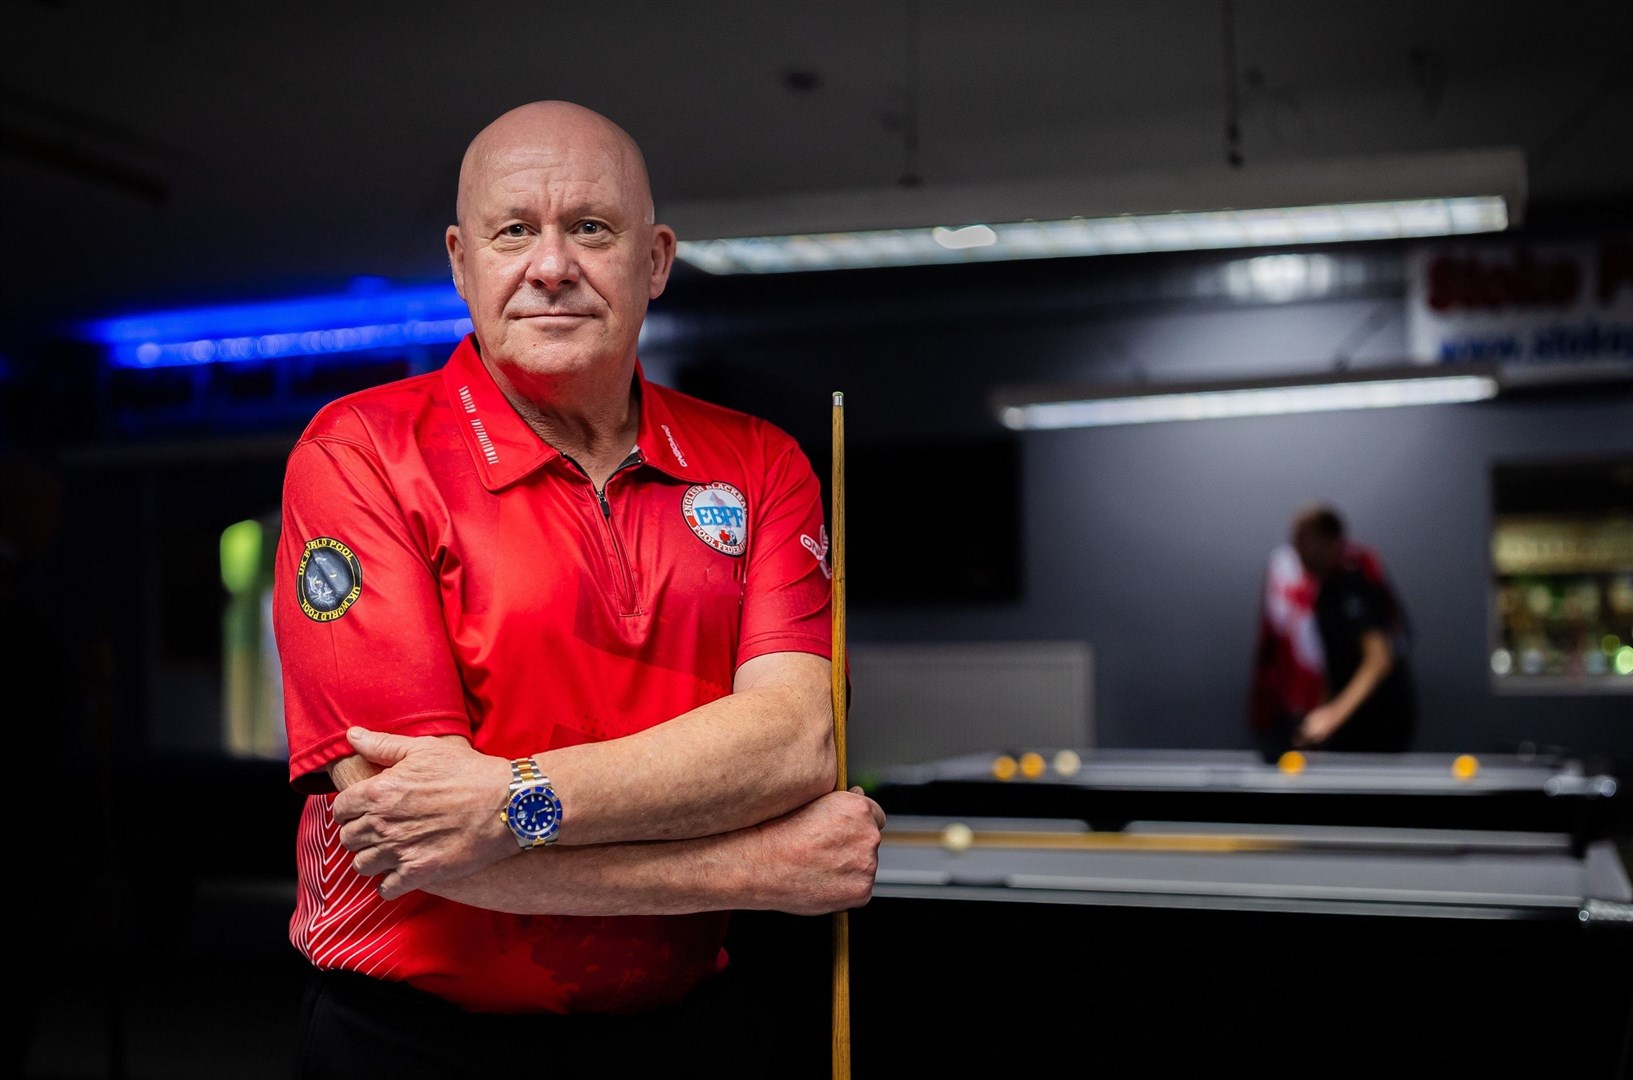 Thousands of hours of practice has led Neil to where he is today – ready to represent his country at the European Pool Championships. (National Lottery/PA)